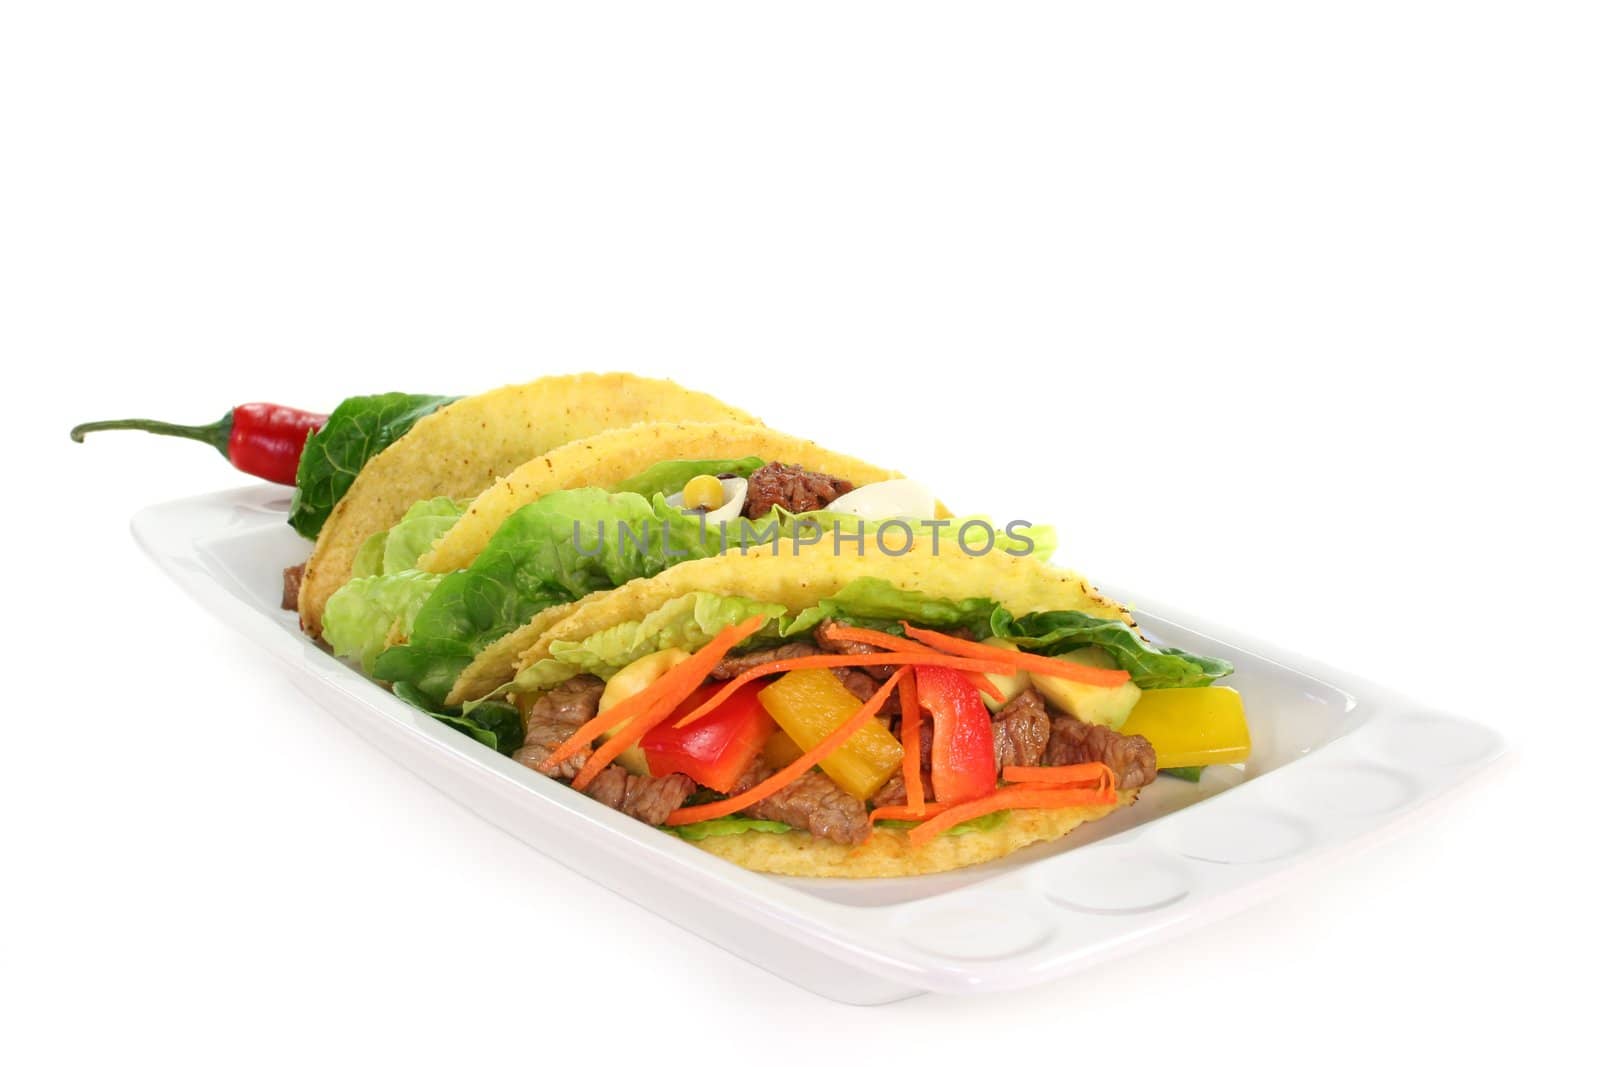 Taco shells filled with beef strips and vegetables